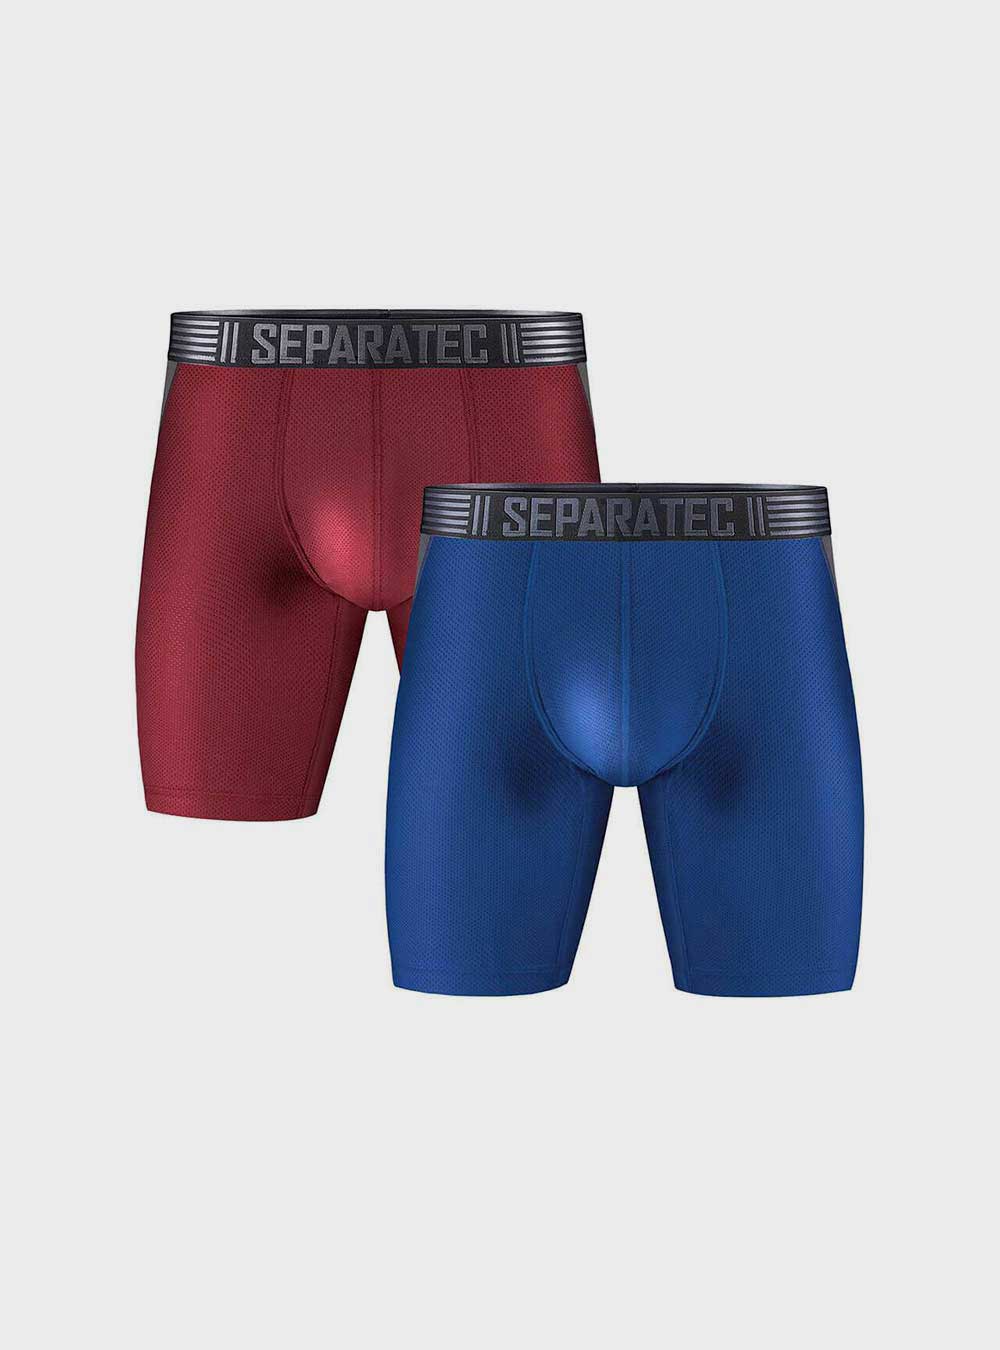 In the realm of shadows and contemplation, Separatec underwear